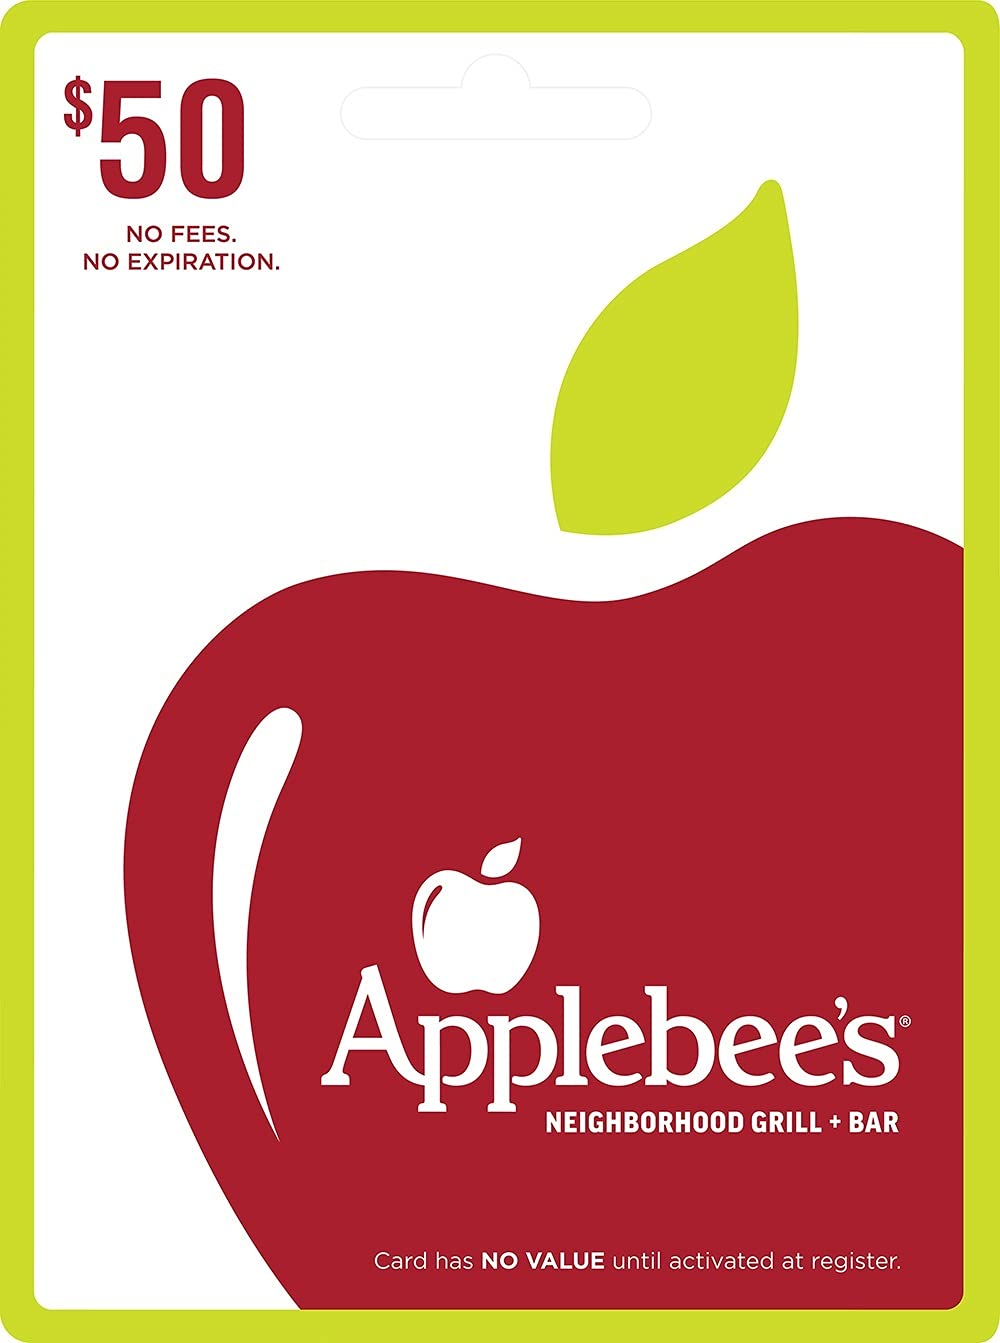 Amazon Lightning Deal: $50 Applebee's Gift Card (Physical Gift Card) $39.50 + Free Shipping